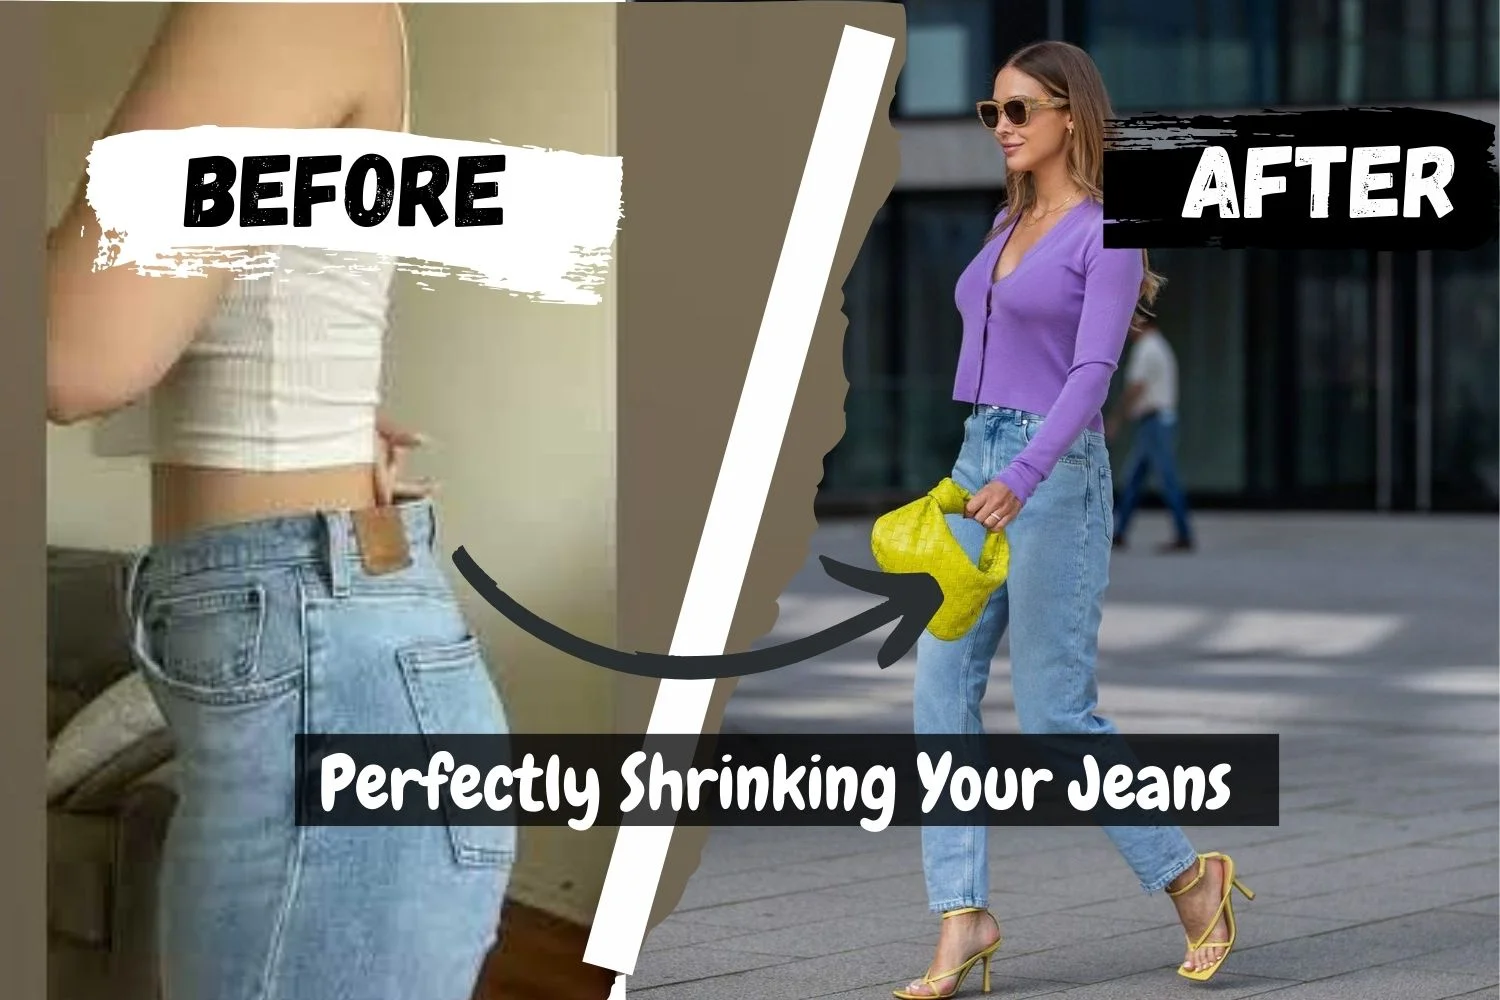 10 Effortless Methods for Perfectly Shrinking Your Jeans